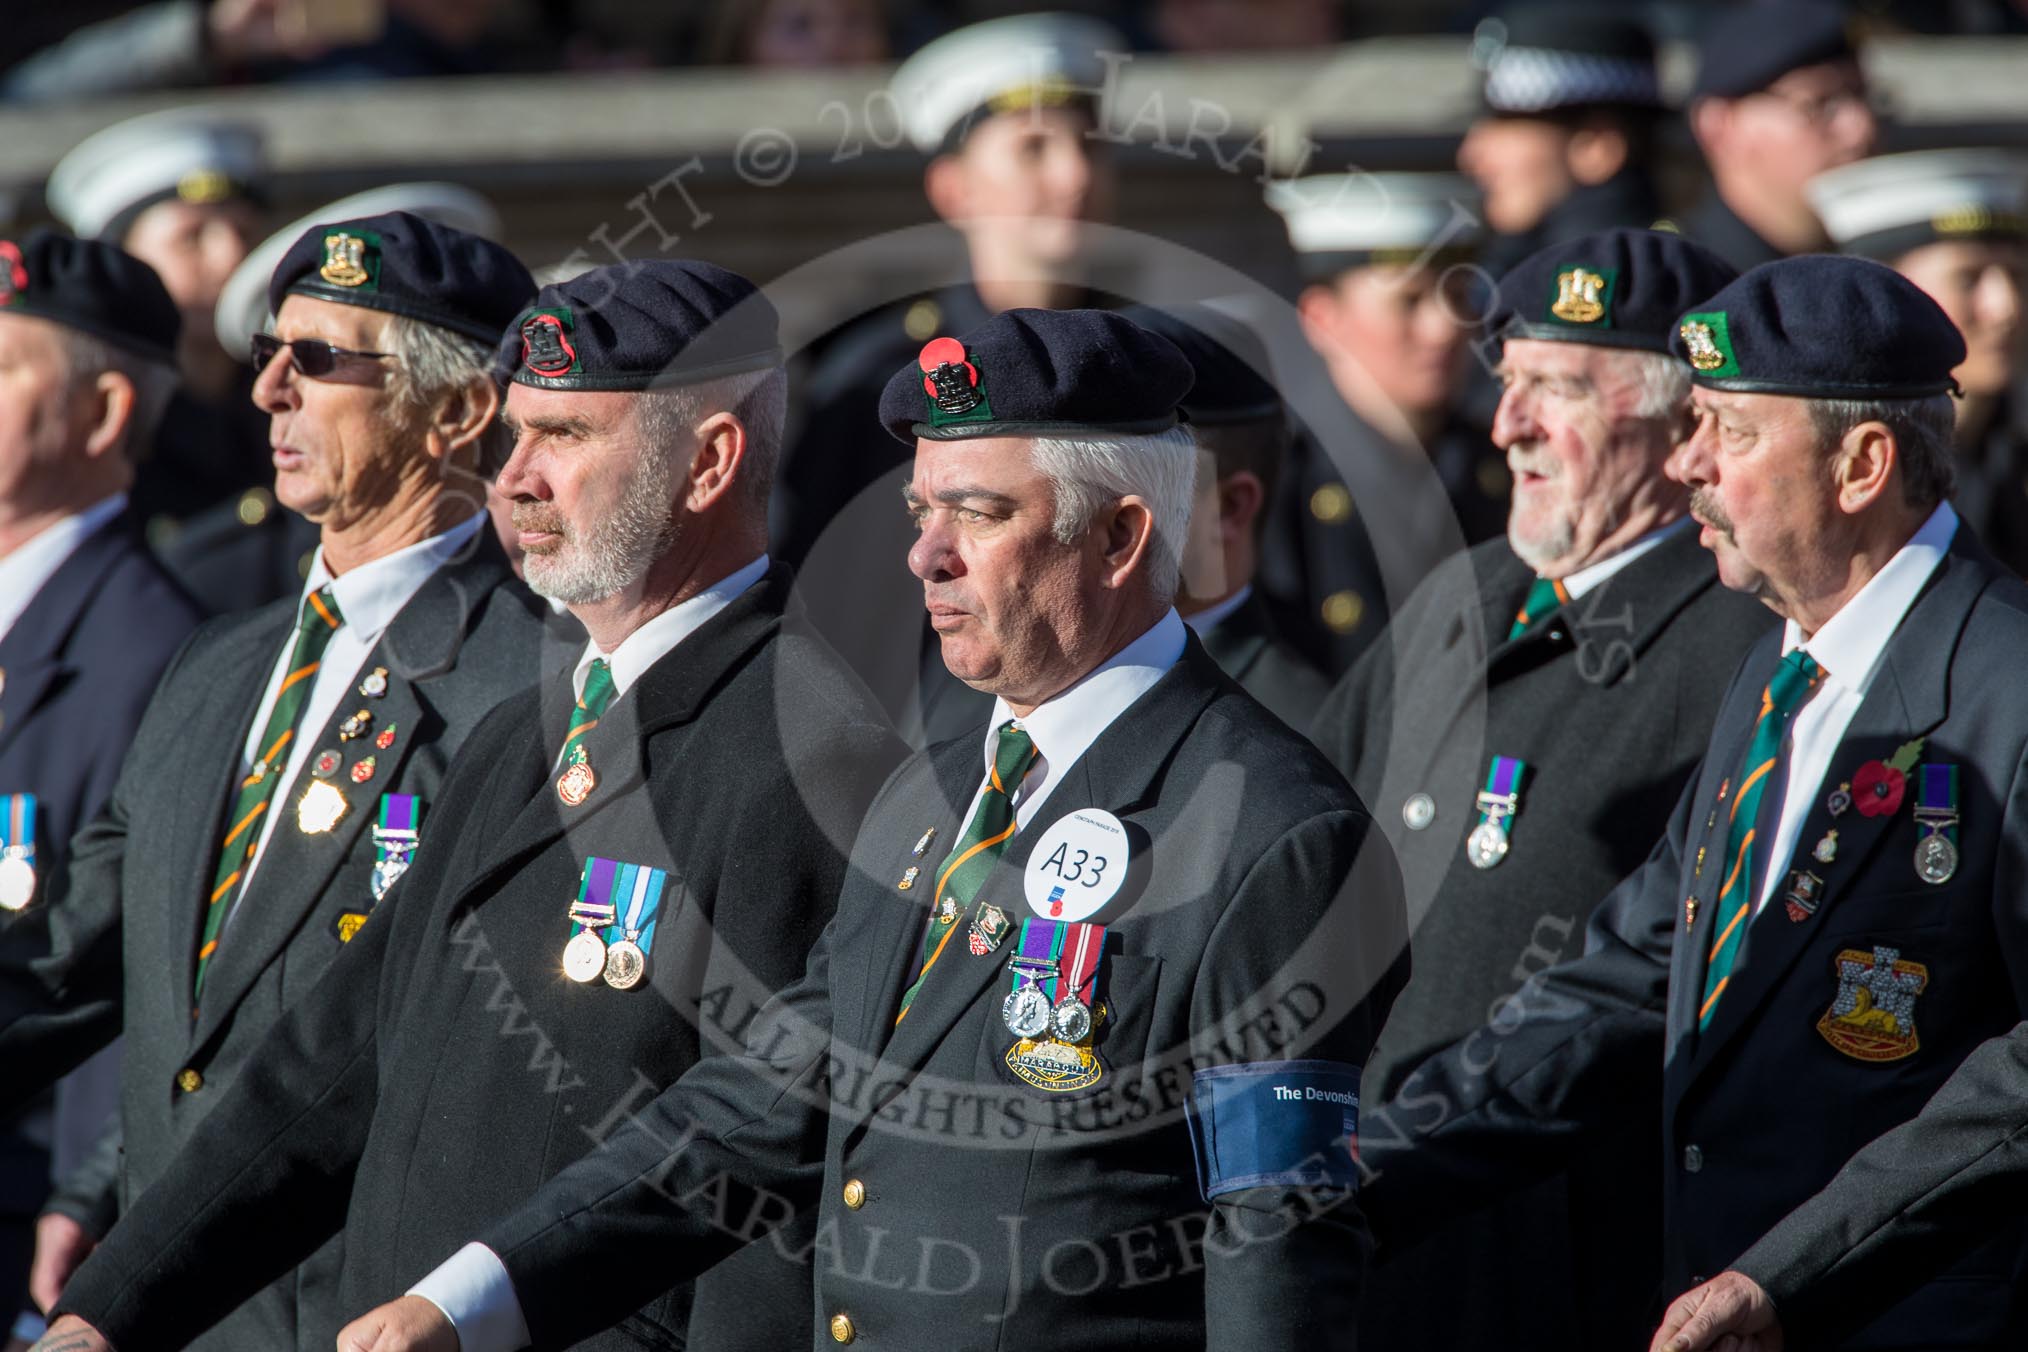 The Devonshire and Dorset Regimental Association (Group A33, 20 members) during the Royal British Legion March Past on Remembrance Sunday at the Cenotaph, Whitehall, Westminster, London, 11 November 2018, 12:02.